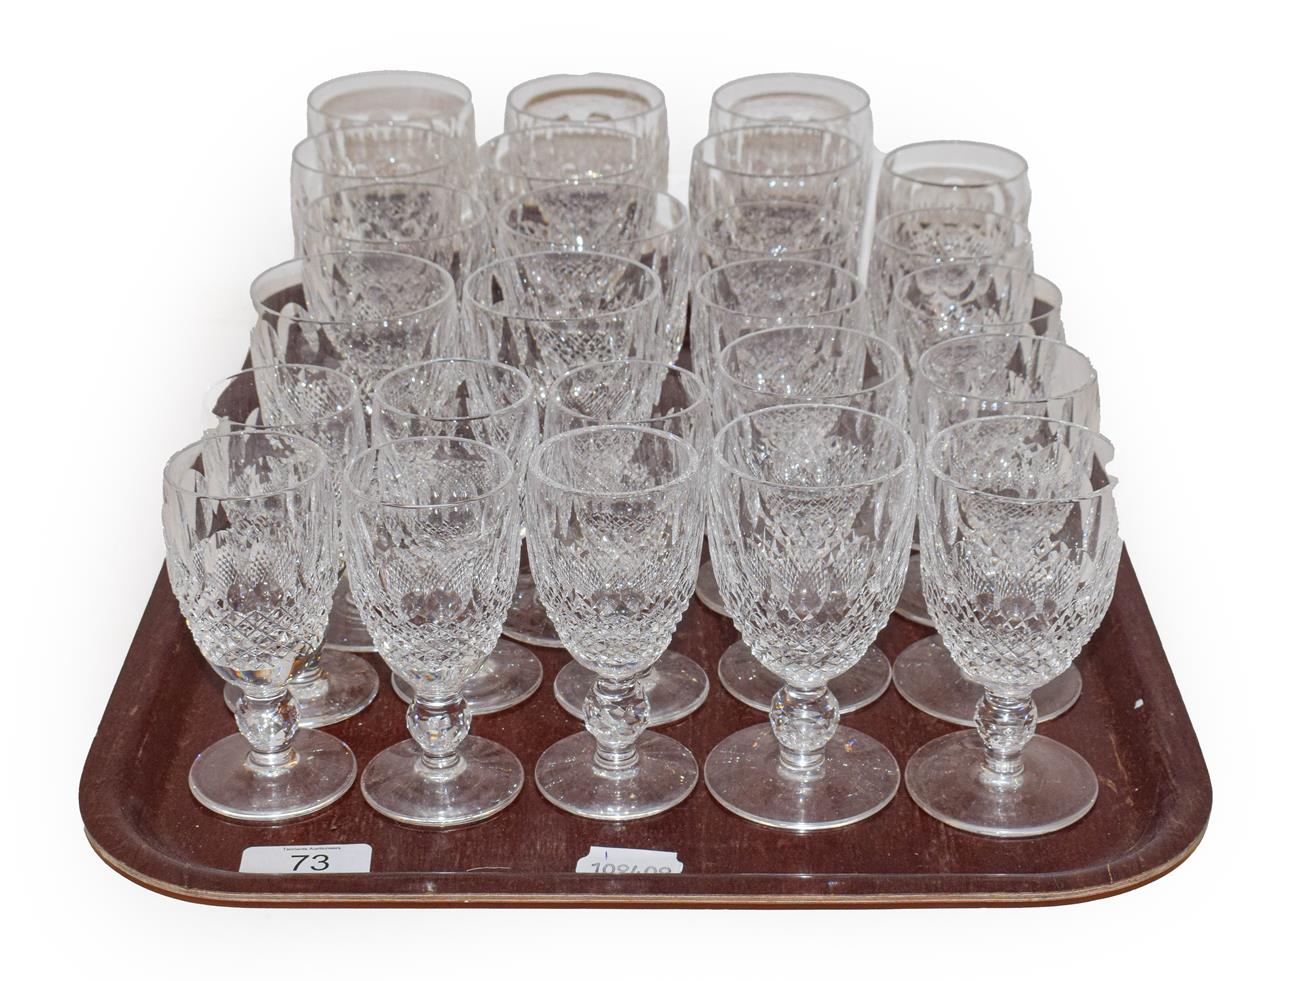 Lot 73 - A part suite of Waterford crystal comprising twenty five glasses of various size, comprising;...